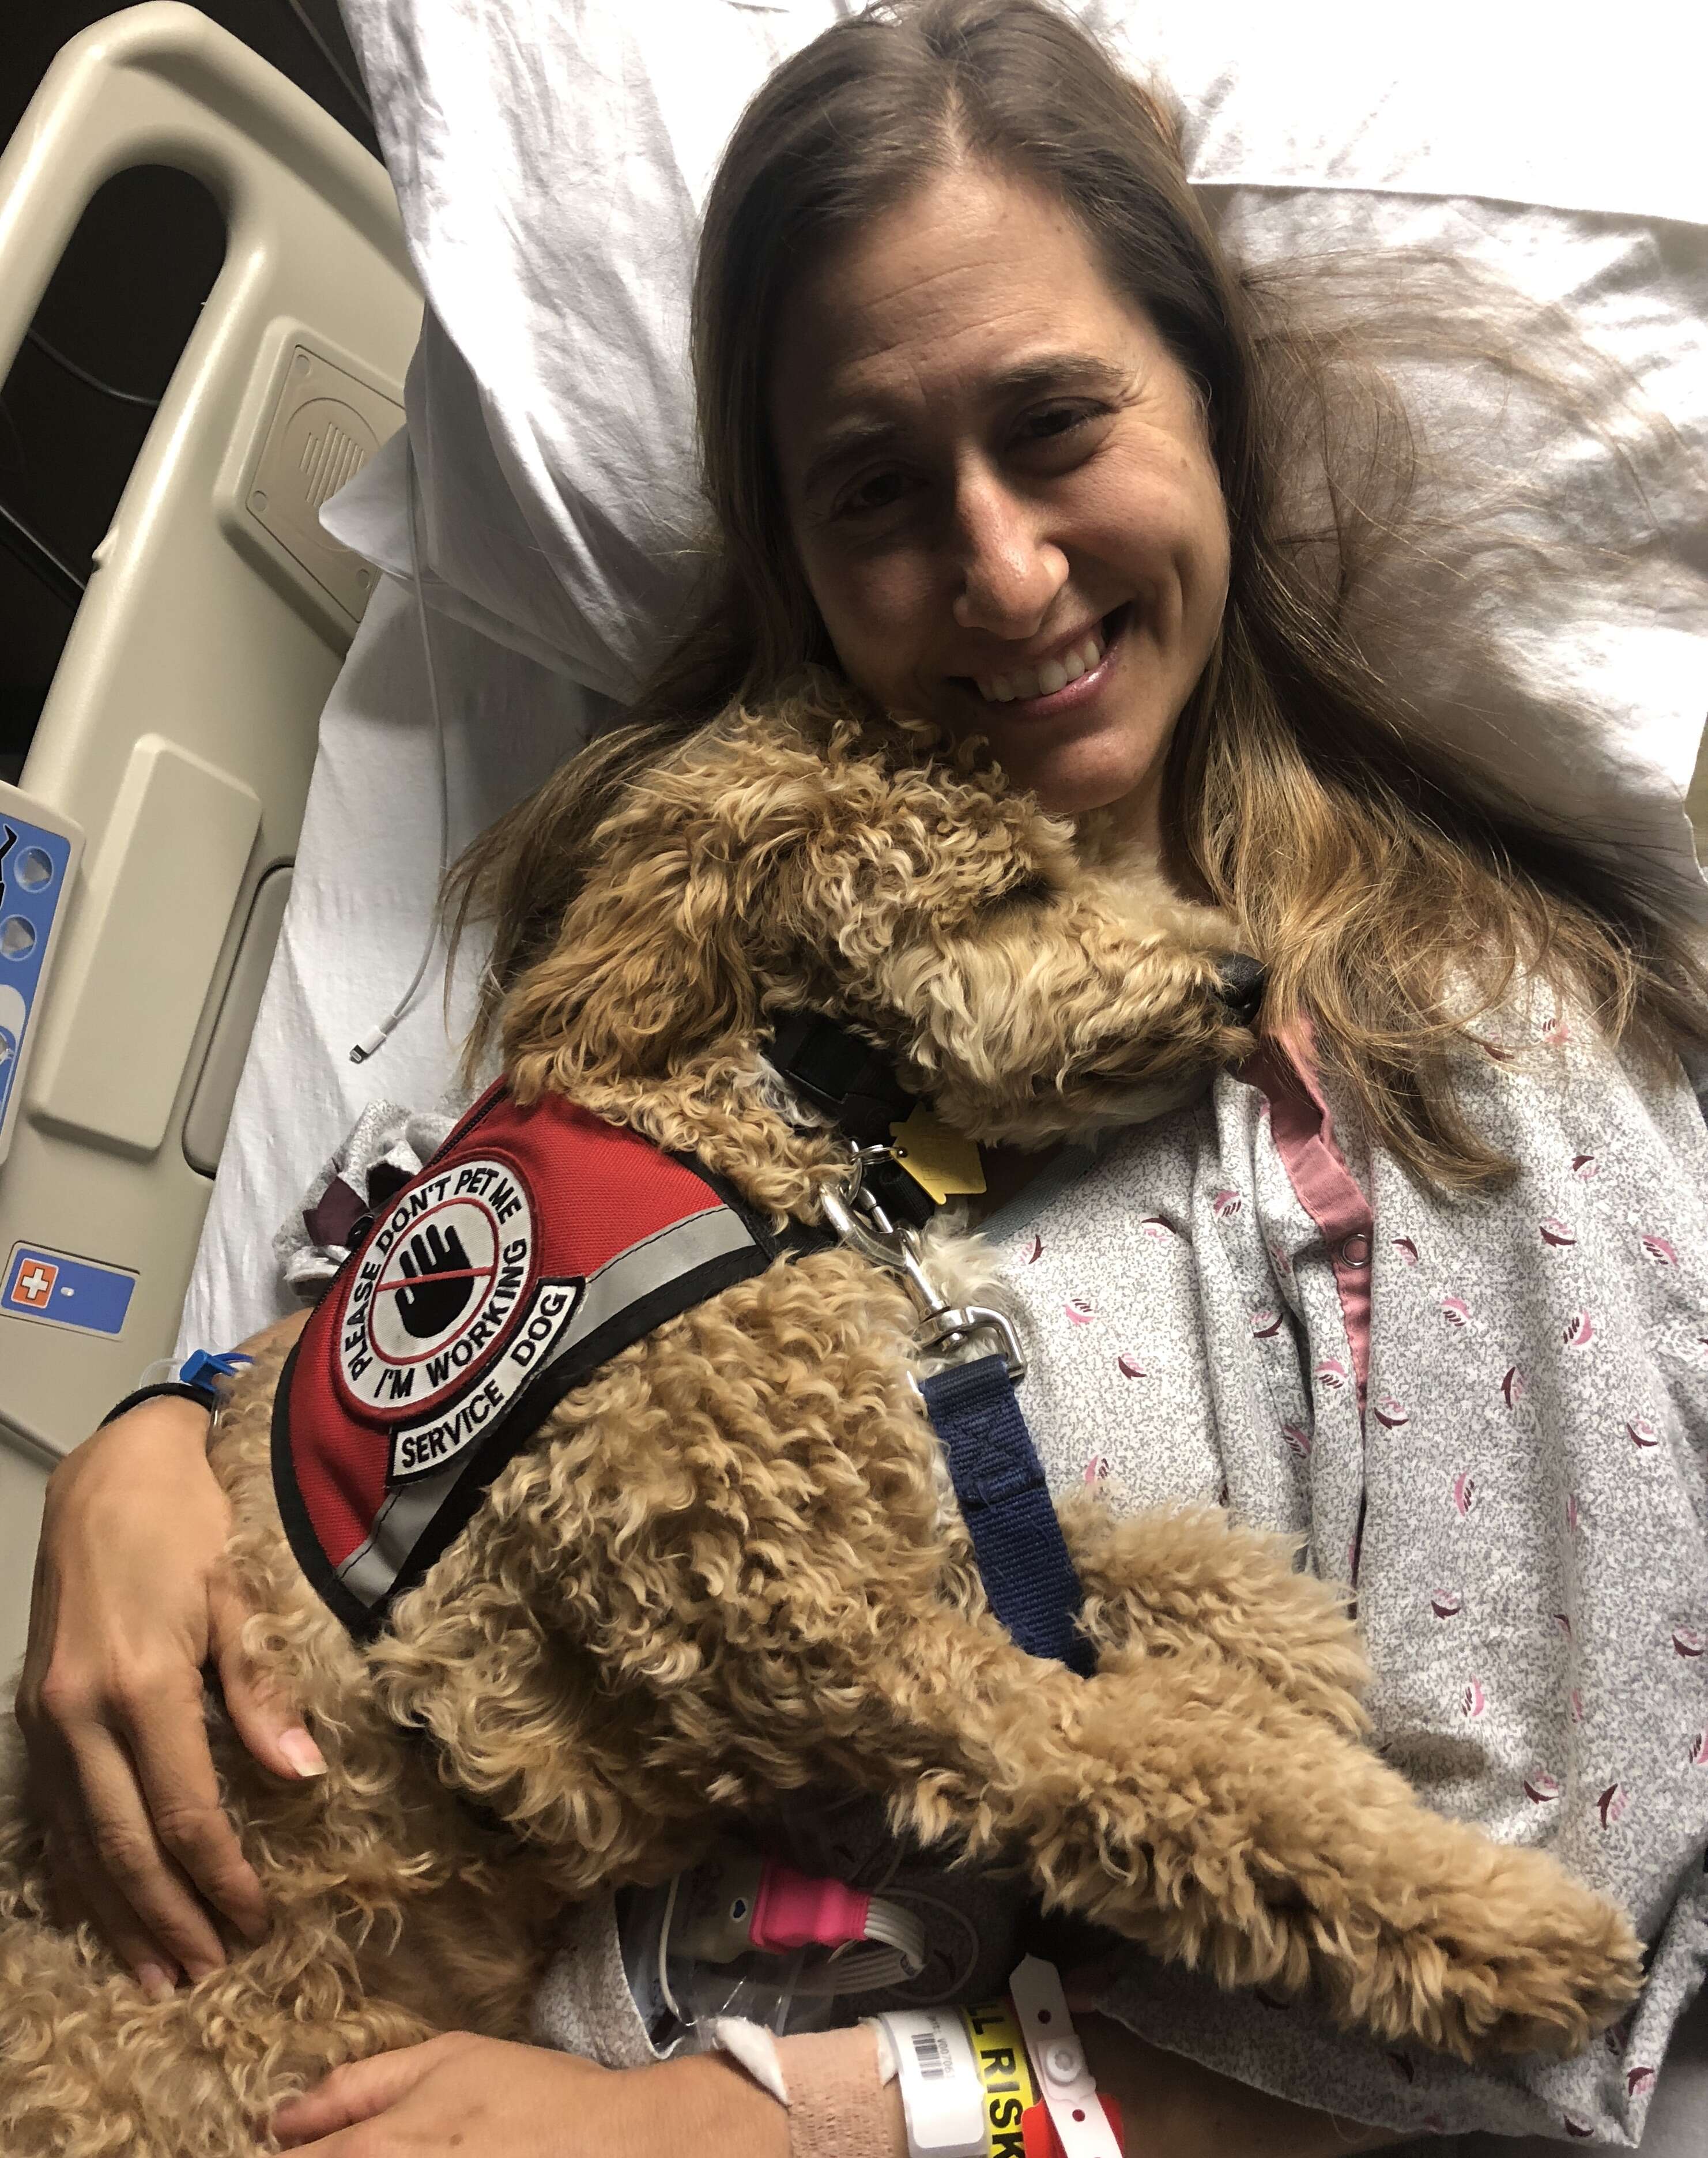 Moxie the service dog and her owner at the hospital